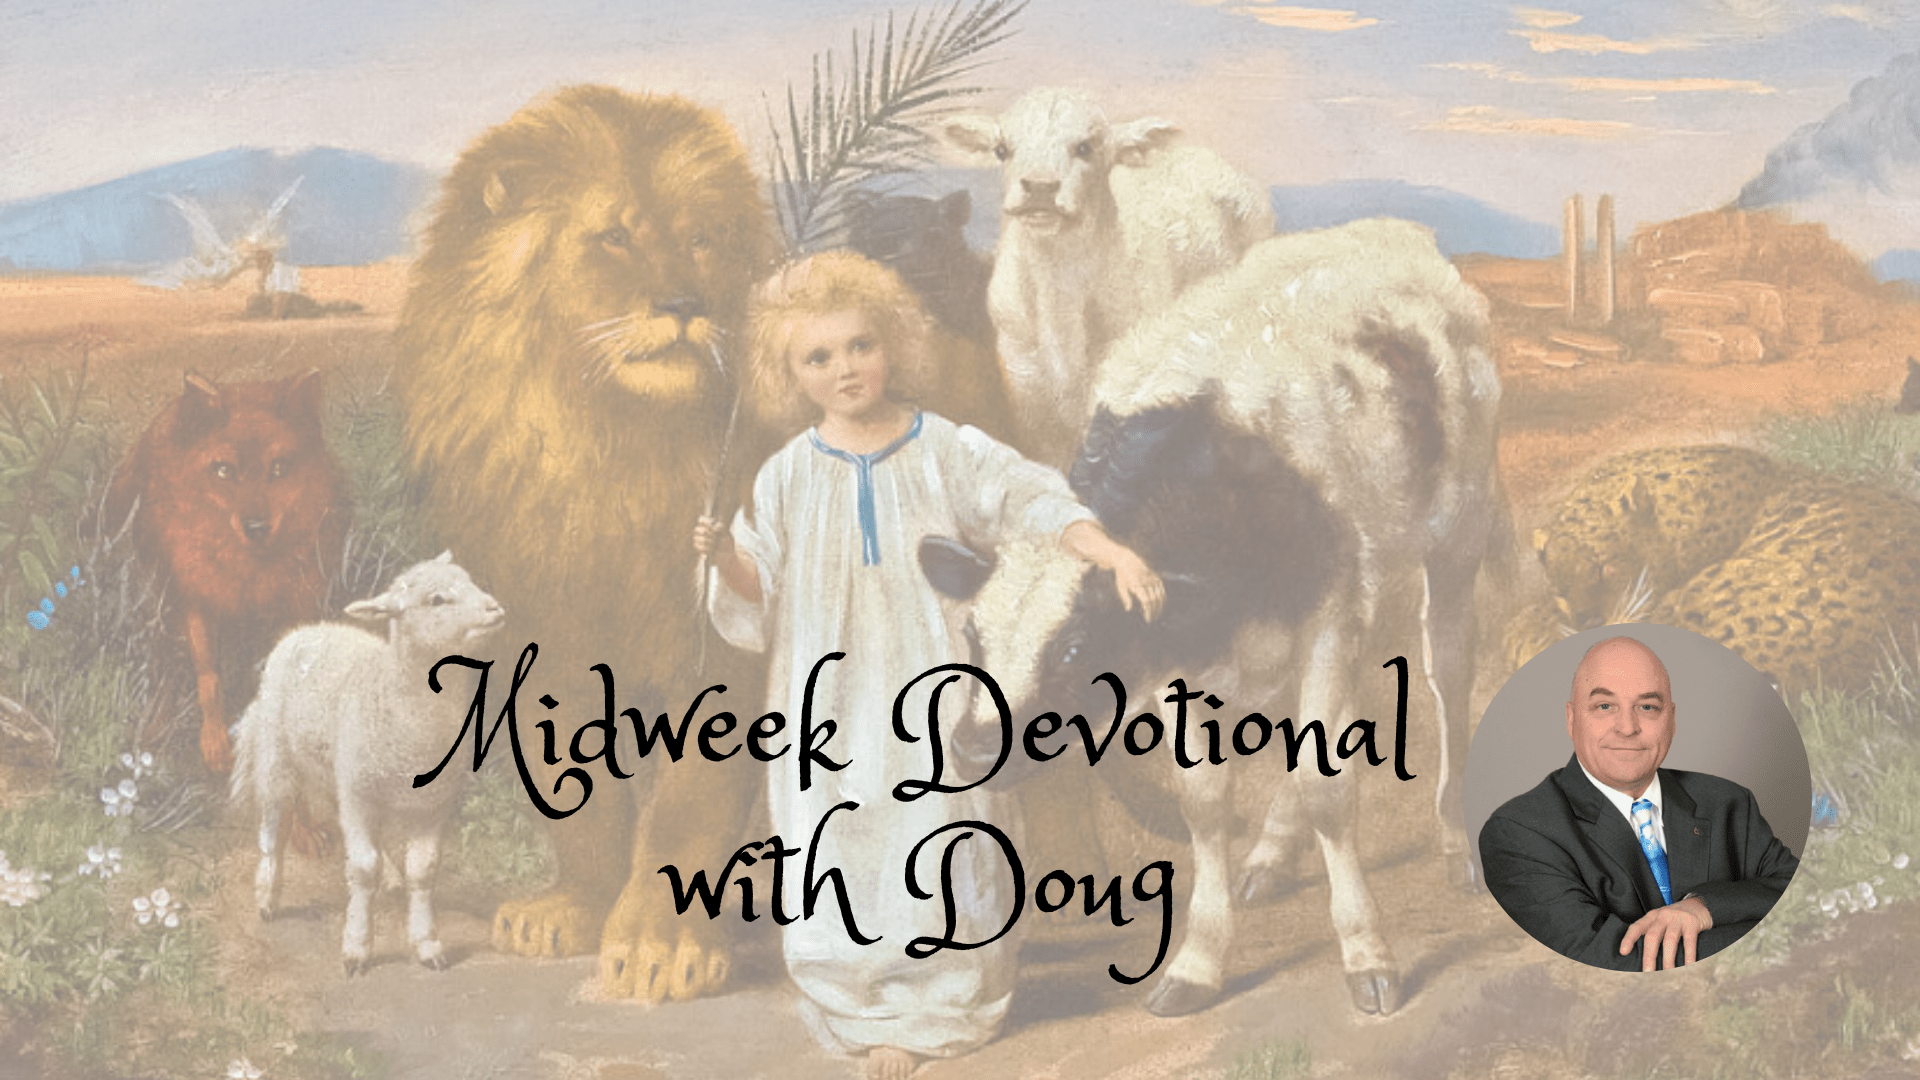 Midweek Devotional with Doug for second week of August